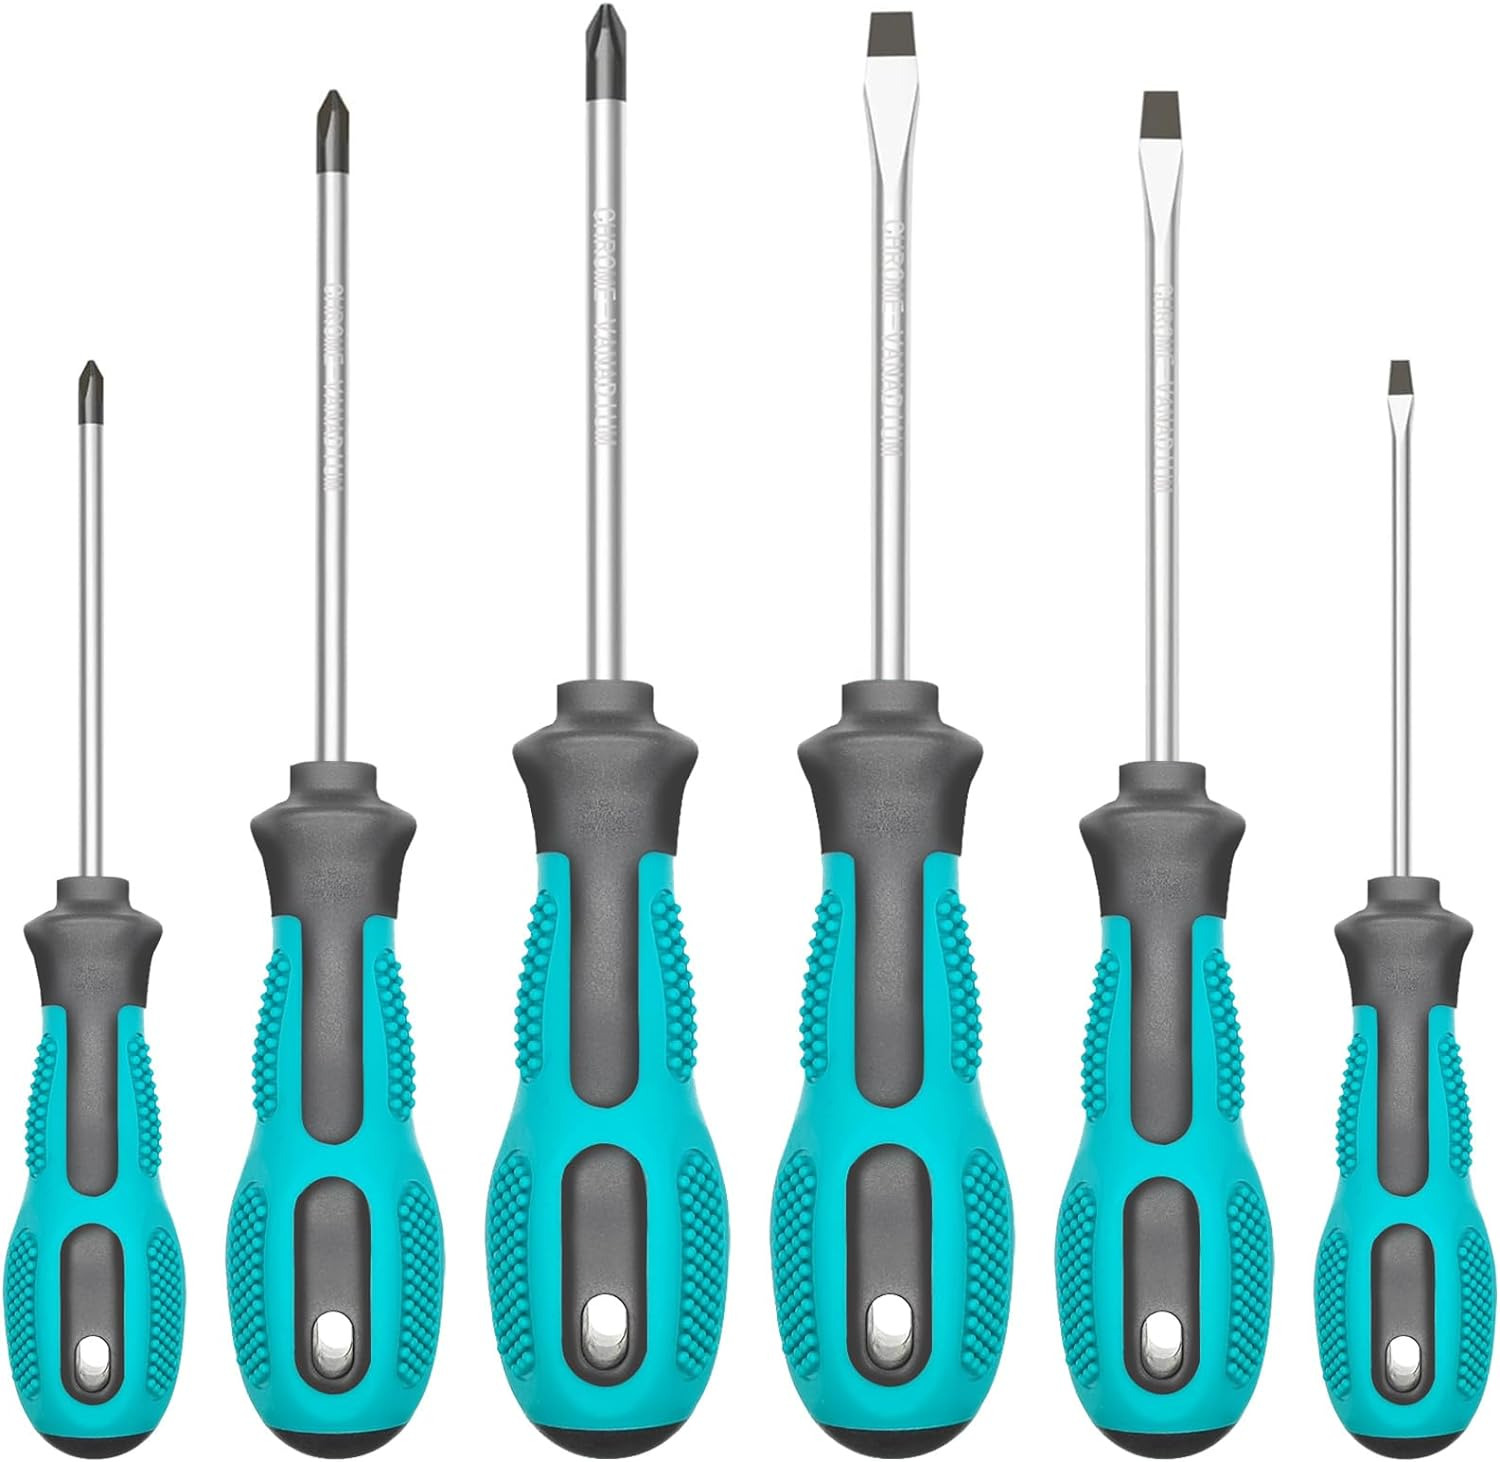 6-Piece Magnetic Screwdriver Set with Non-Slip Grip